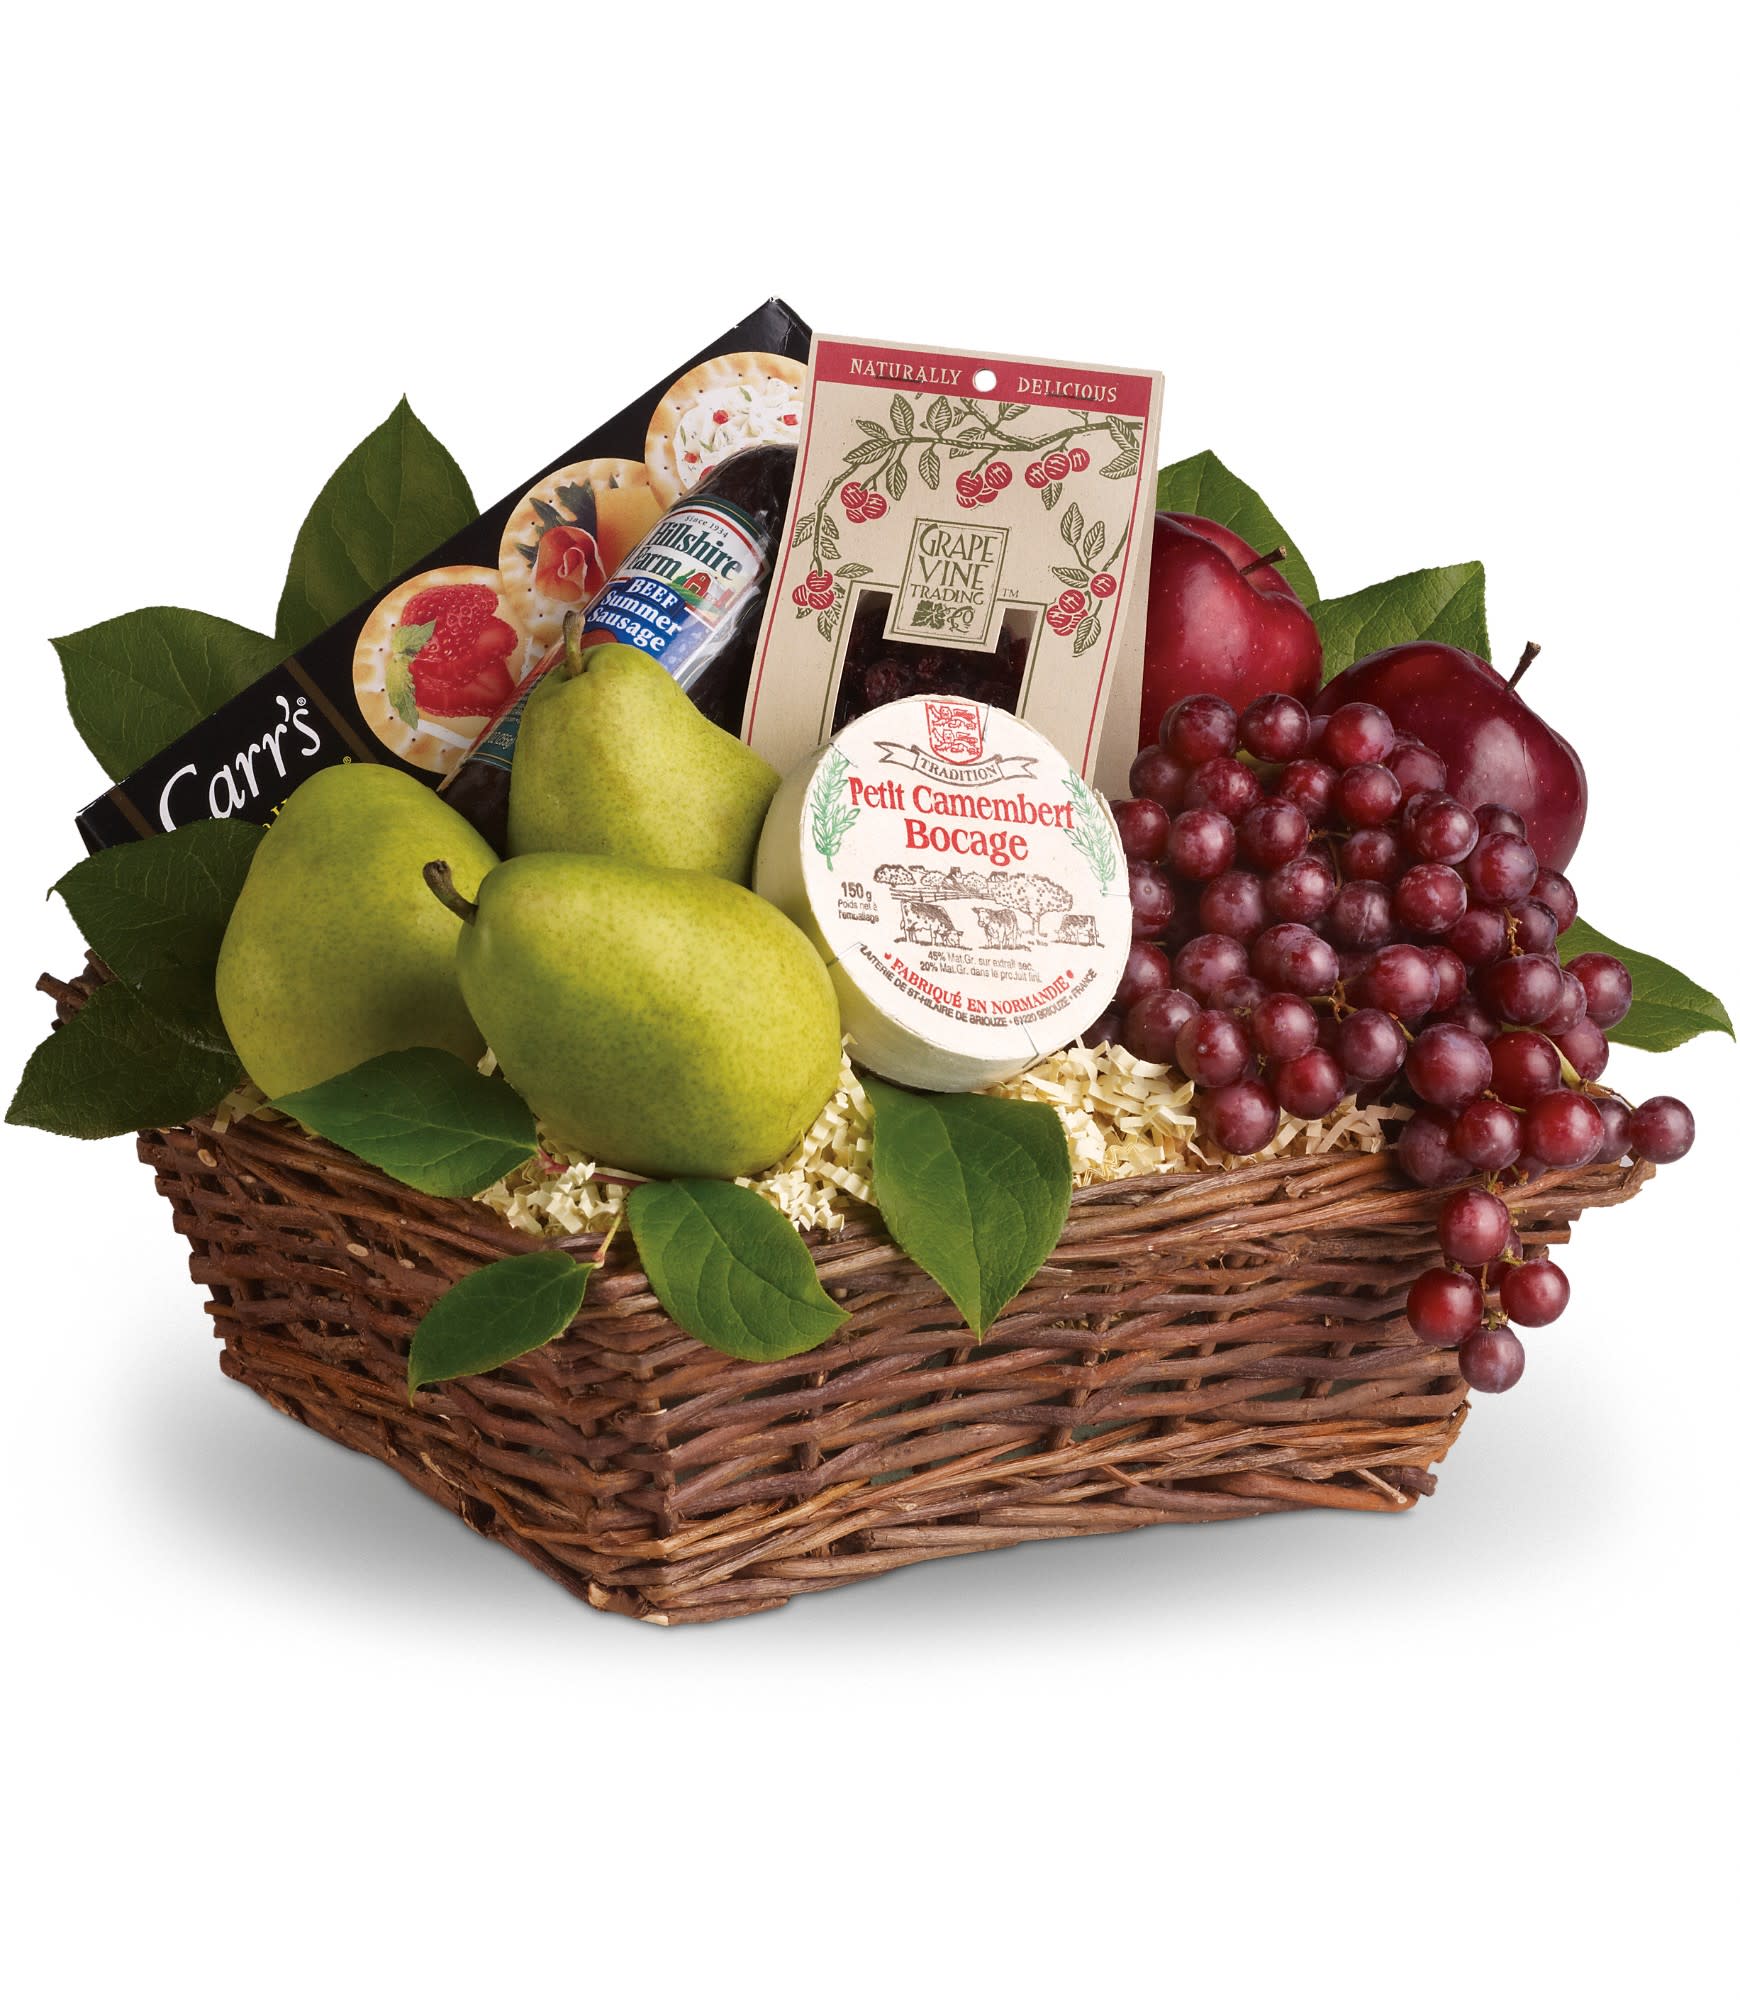 Delicious Delights Basket - It's delicious. It's delightful. It's a foody dream come true. Full of fruit, fun and more, this is a perfect gift for any occasion.  Red apples and grapes, pears, yummy dried cranberries, cheese, summer sausage and crackers are all wrapped up in a wicker basket and ready to be enjoyed. Deliciously different!  Approximately 16&quot; W x 12&quot; H   Please note: All of our bouquets and gift baskets are hand-arranged and delivered locally by professional florists. This item may require additional lead time so same-day delivery is not available.  Orientation: N/A  As Shown : T107-2A Deluxe : T107-2B Premium : T107-2C